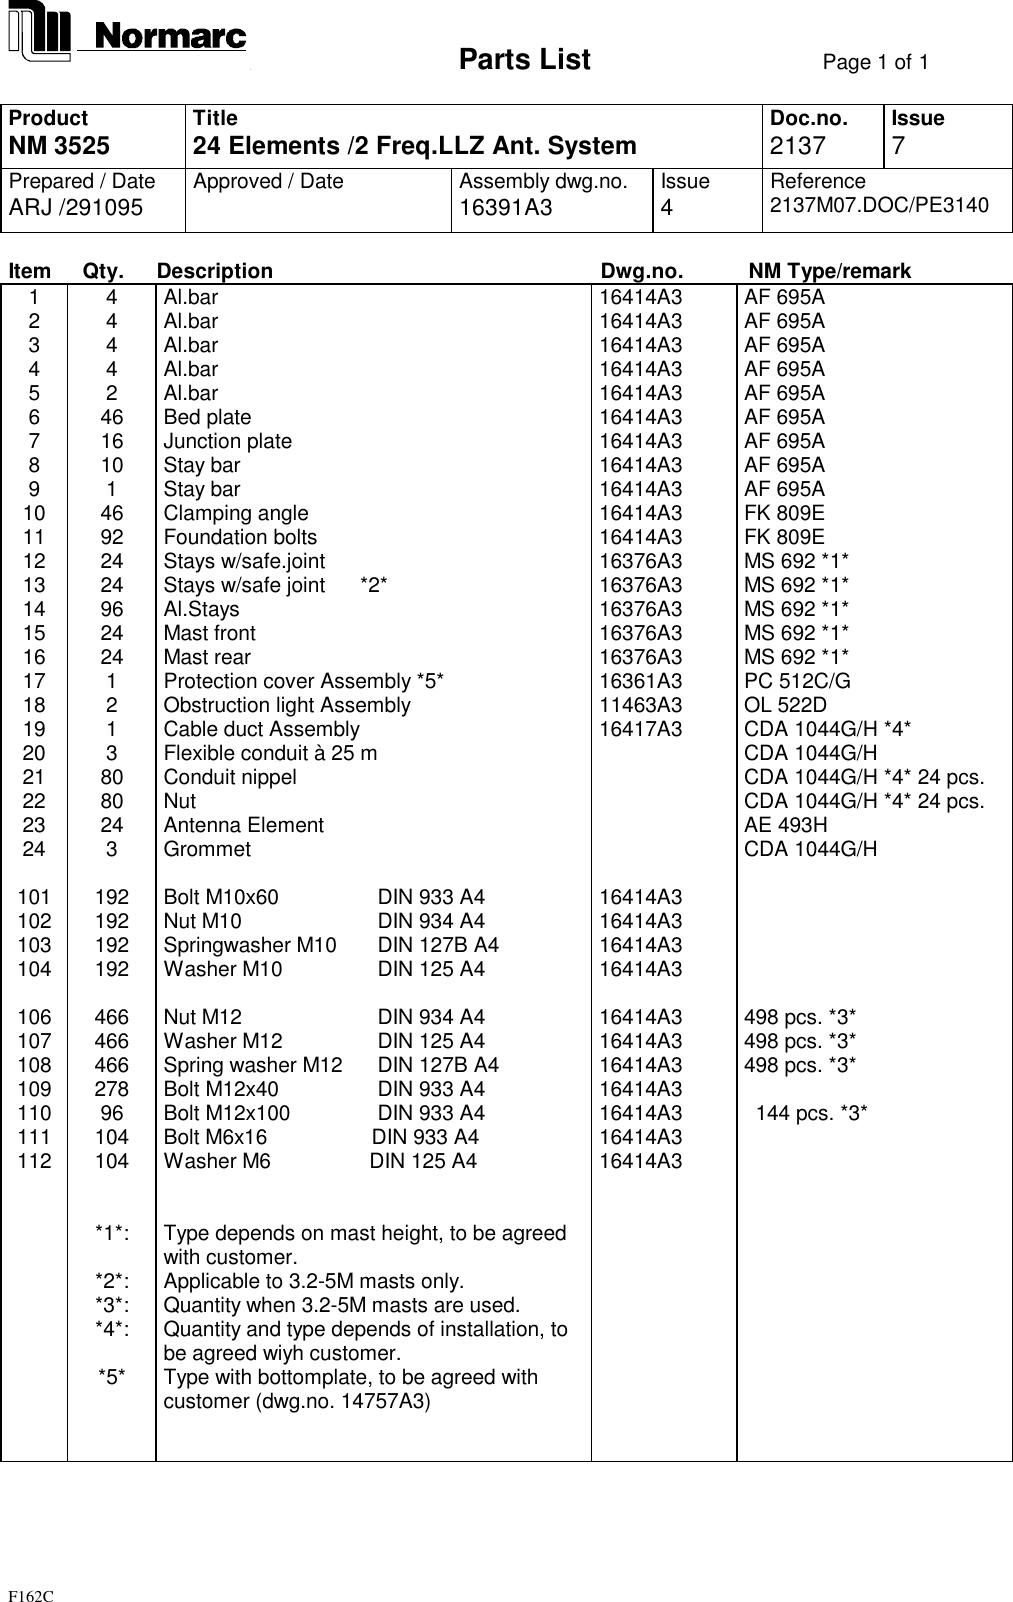                             Parts List Page 1 of 1F162CProductNM 3525 Title24 Elements /2 Freq.LLZ Ant. System Doc.no.2137 Issue7Prepared / DateARJ /291095 Approved / Date Assembly dwg.no.16391A3 Issue4Reference2137M07.DOC/PE3140Item Qty. Description Dwg.no. NM Type/remark1 4 Al.bar 16414A3 AF 695A2 4 Al.bar 16414A3 AF 695A3 4 Al.bar 16414A3 AF 695A4 4 Al.bar 16414A3 AF 695A5 2 Al.bar 16414A3 AF 695A6 46 Bed plate 16414A3 AF 695A7 16 Junction plate 16414A3 AF 695A8 10 Stay bar 16414A3 AF 695A9 1 Stay bar 16414A3 AF 695A10 46 Clamping angle 16414A3 FK 809E11 92 Foundation bolts 16414A3 FK 809E12 24 Stays w/safe.joint 16376A3 MS 692 *1*13 24 Stays w/safe joint      *2* 16376A3 MS 692 *1*14 96 Al.Stays 16376A3 MS 692 *1*15 24 Mast front 16376A3 MS 692 *1*16 24 Mast rear 16376A3 MS 692 *1*17 1 Protection cover Assembly *5* 16361A3 PC 512C/G18 2 Obstruction light Assembly 11463A3 OL 522D19 1 Cable duct Assembly 16417A3 CDA 1044G/H *4*20 3 Flexible conduit à 25 m CDA 1044G/H21 80 Conduit nippel CDA 1044G/H *4* 24 pcs.22 80 Nut CDA 1044G/H *4* 24 pcs.23 24 Antenna Element AE 493H24 3 Grommet CDA 1044G/H101 192 Bolt M10x60     DIN 933 A4 16414A3102 192 Nut M10         DIN 934 A4 16414A3103 192 Springwasher M10    DIN 127B A4 16414A3104 192 Washer M10     DIN 125 A4 16414A3106 466 Nut M12          DIN 934 A4 16414A3 498 pcs. *3*107 466 Washer M12      DIN 125 A4 16414A3 498 pcs. *3*108 466 Spring washer M12   DIN 127B A4 16414A3 498 pcs. *3*109 278 Bolt M12x40       DIN 933 A4 16414A3110 96 Bolt M12x100     DIN 933 A4 16414A3   144 pcs. *3*111 104 Bolt M6x16                  DIN 933 A4 16414A3112 104 Washer M6                 DIN 125 A4 16414A3*1*: Type depends on mast height, to be agreedwith customer.*2*: Applicable to 3.2-5M masts only.*3*: Quantity when 3.2-5M masts are used.*4*: Quantity and type depends of installation, tobe agreed wiyh customer.*5* Type with bottomplate, to be agreed withcustomer (dwg.no. 14757A3)